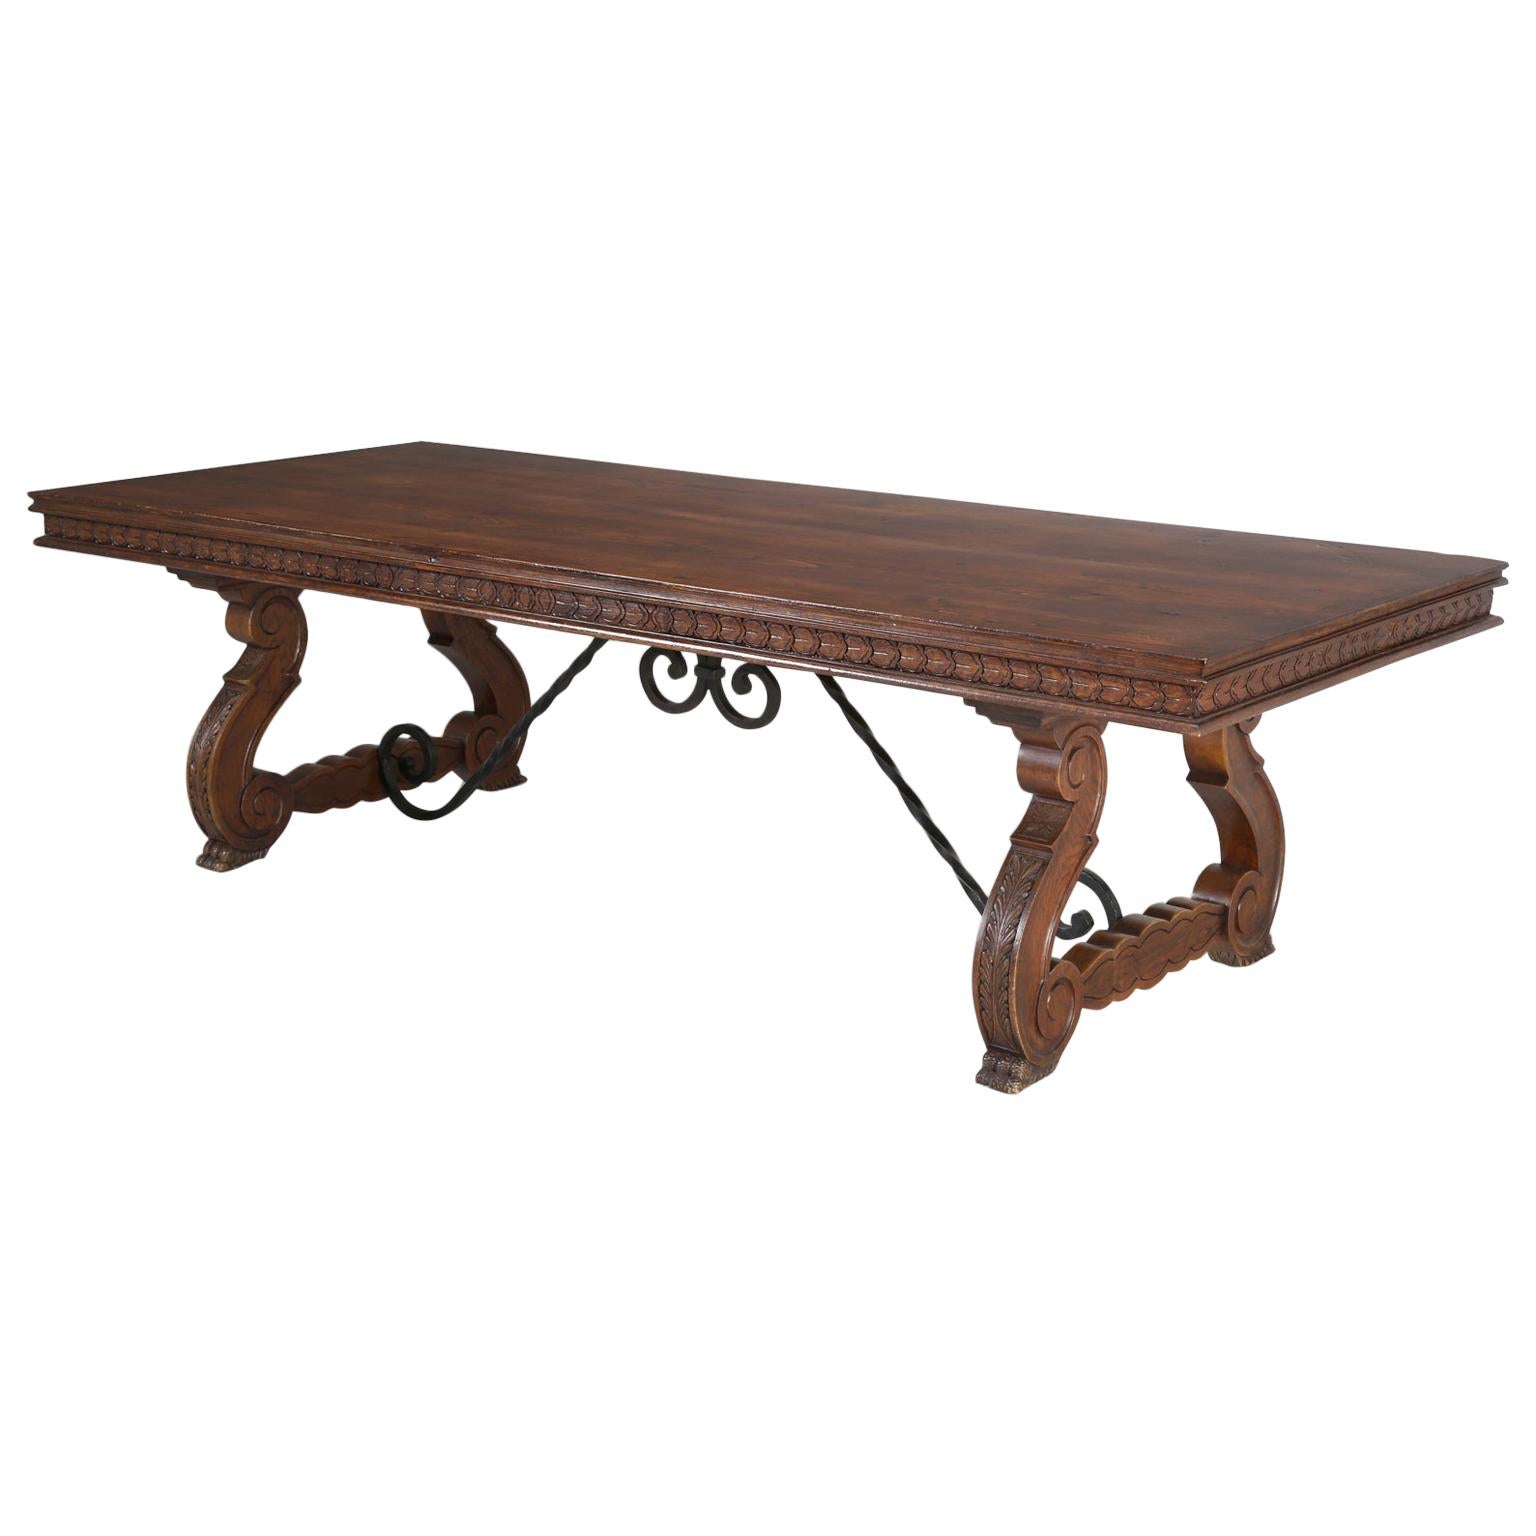 Vintage Carved Spanish Trestle Style Dining Table